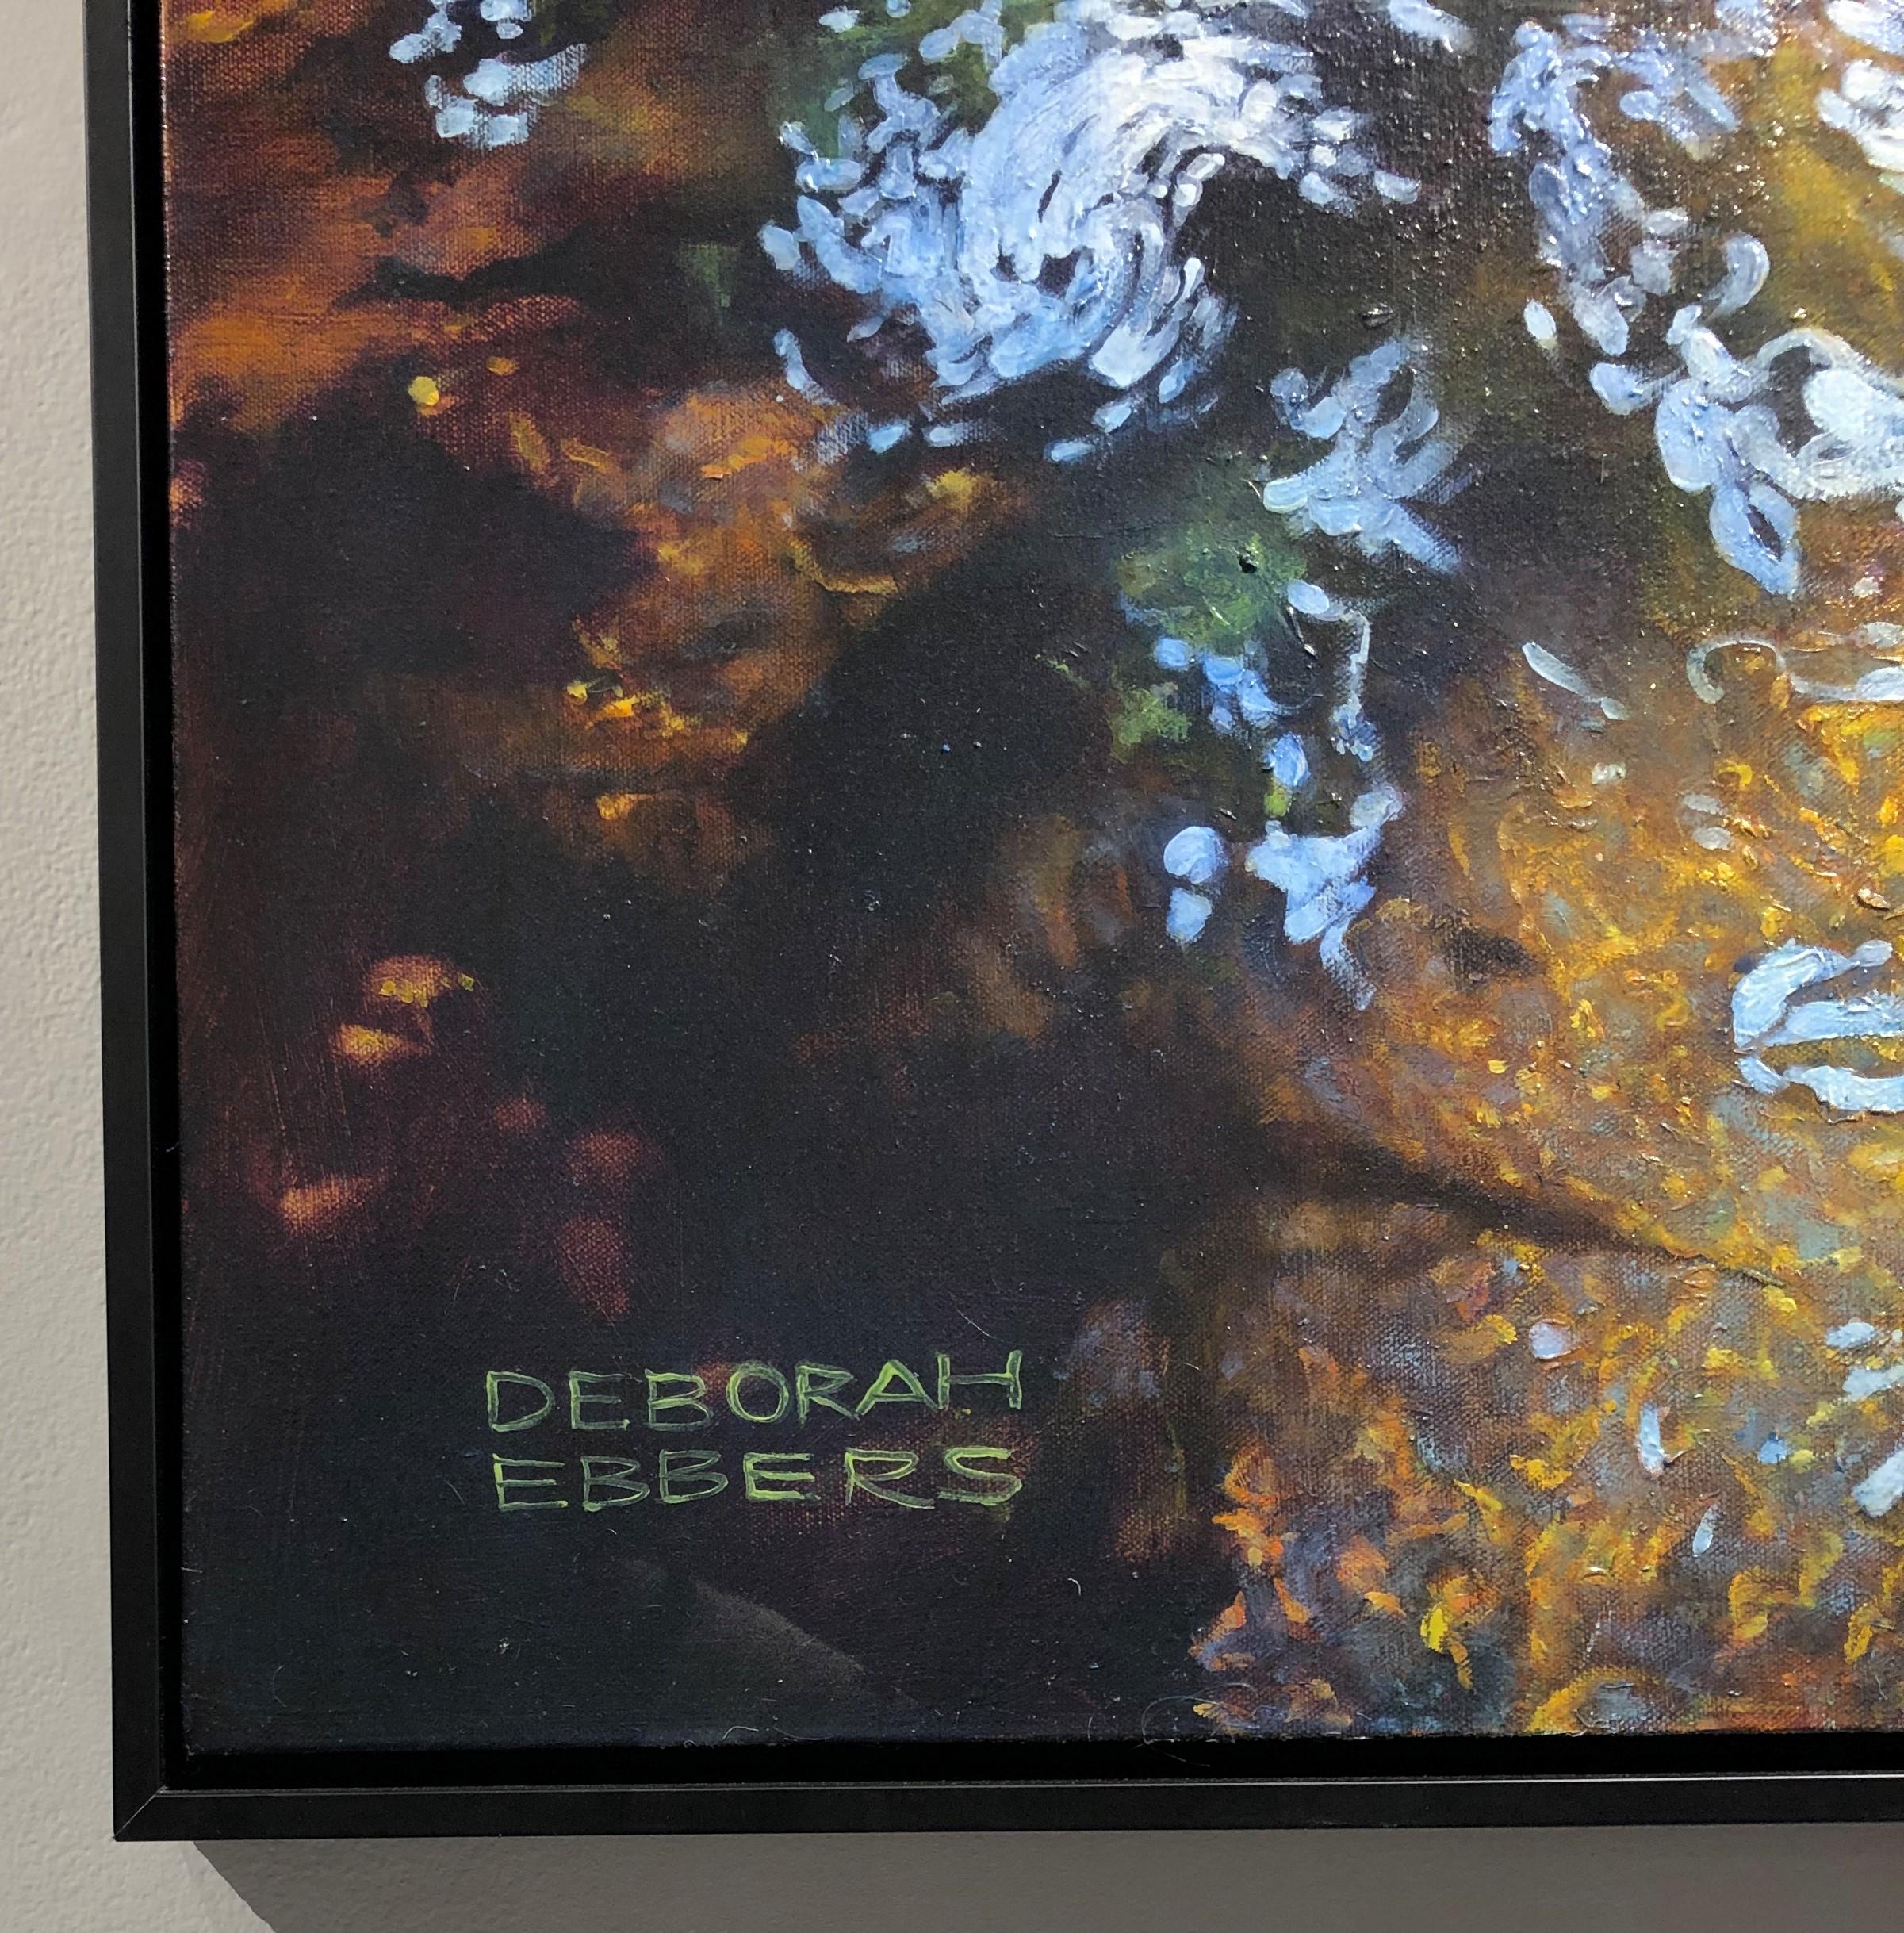 Light Play - Oil on Canvas Painting of Water and Trees with Reflecting Light - Black Landscape Painting by Deborah Ebbers